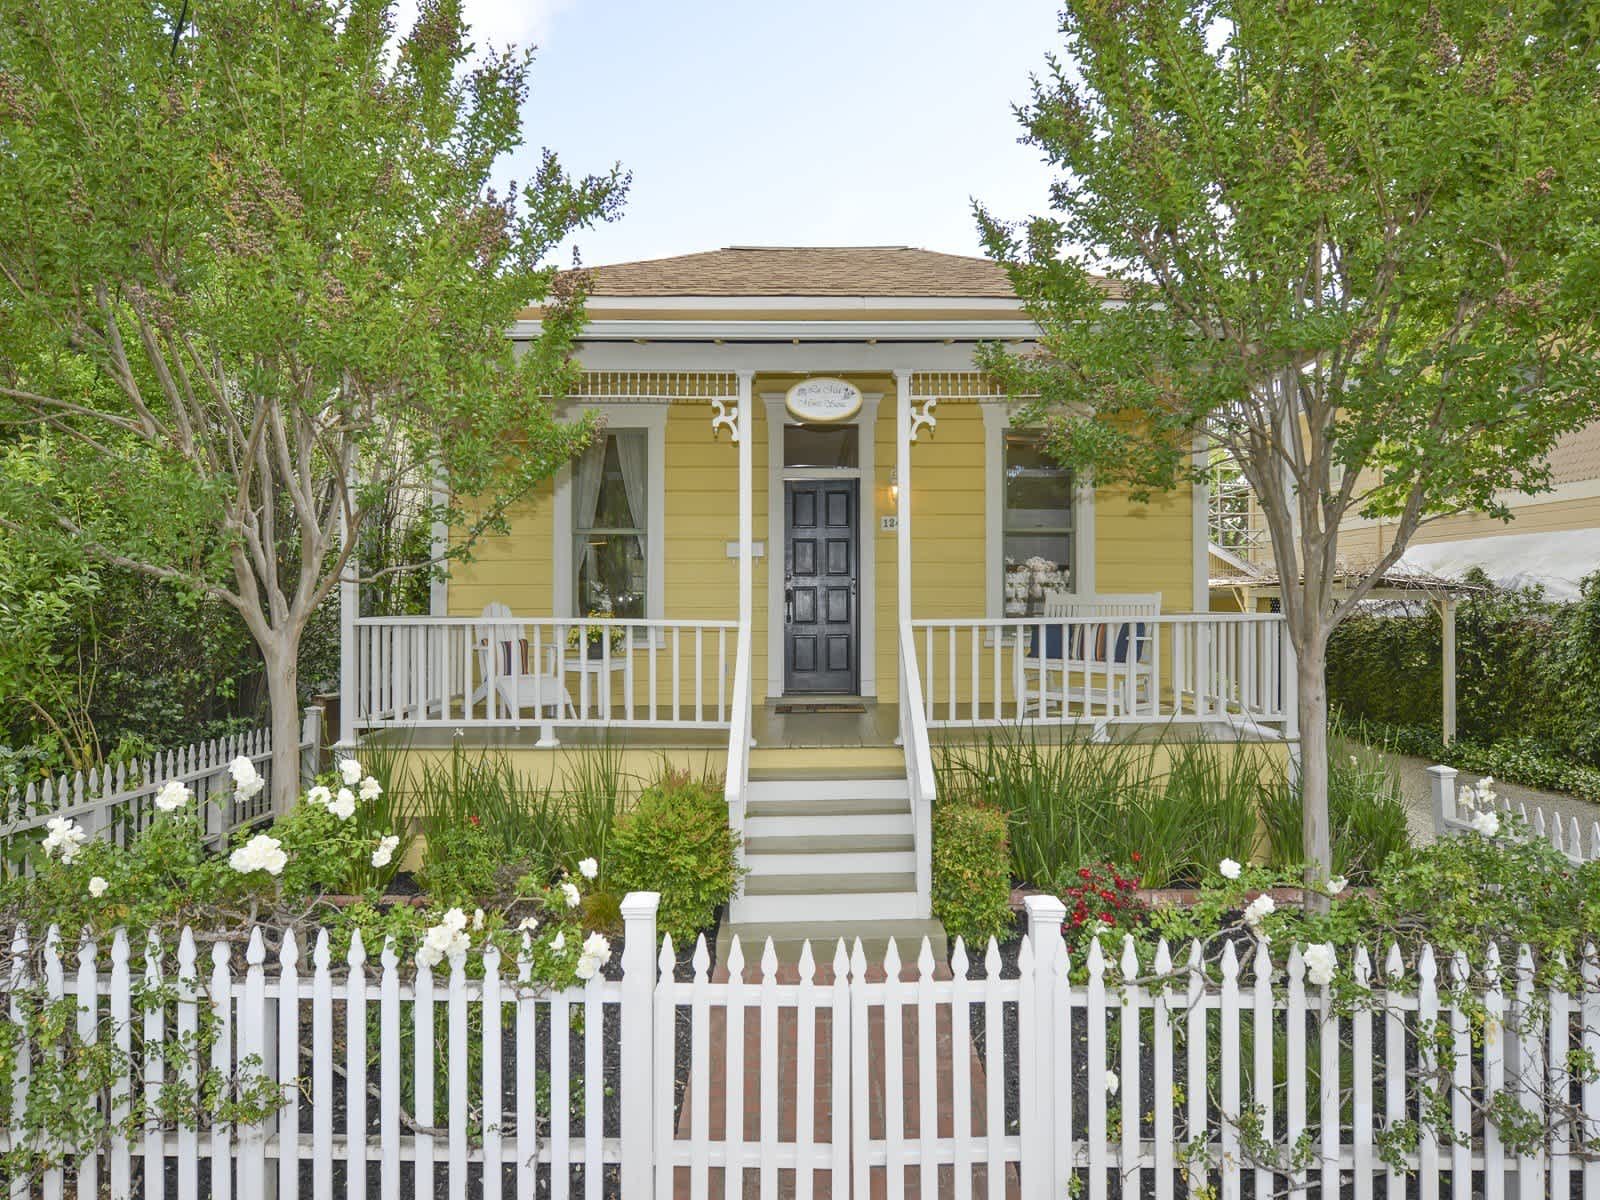 Charming and Chic: Small Houses with Enchanting Curb Appeal